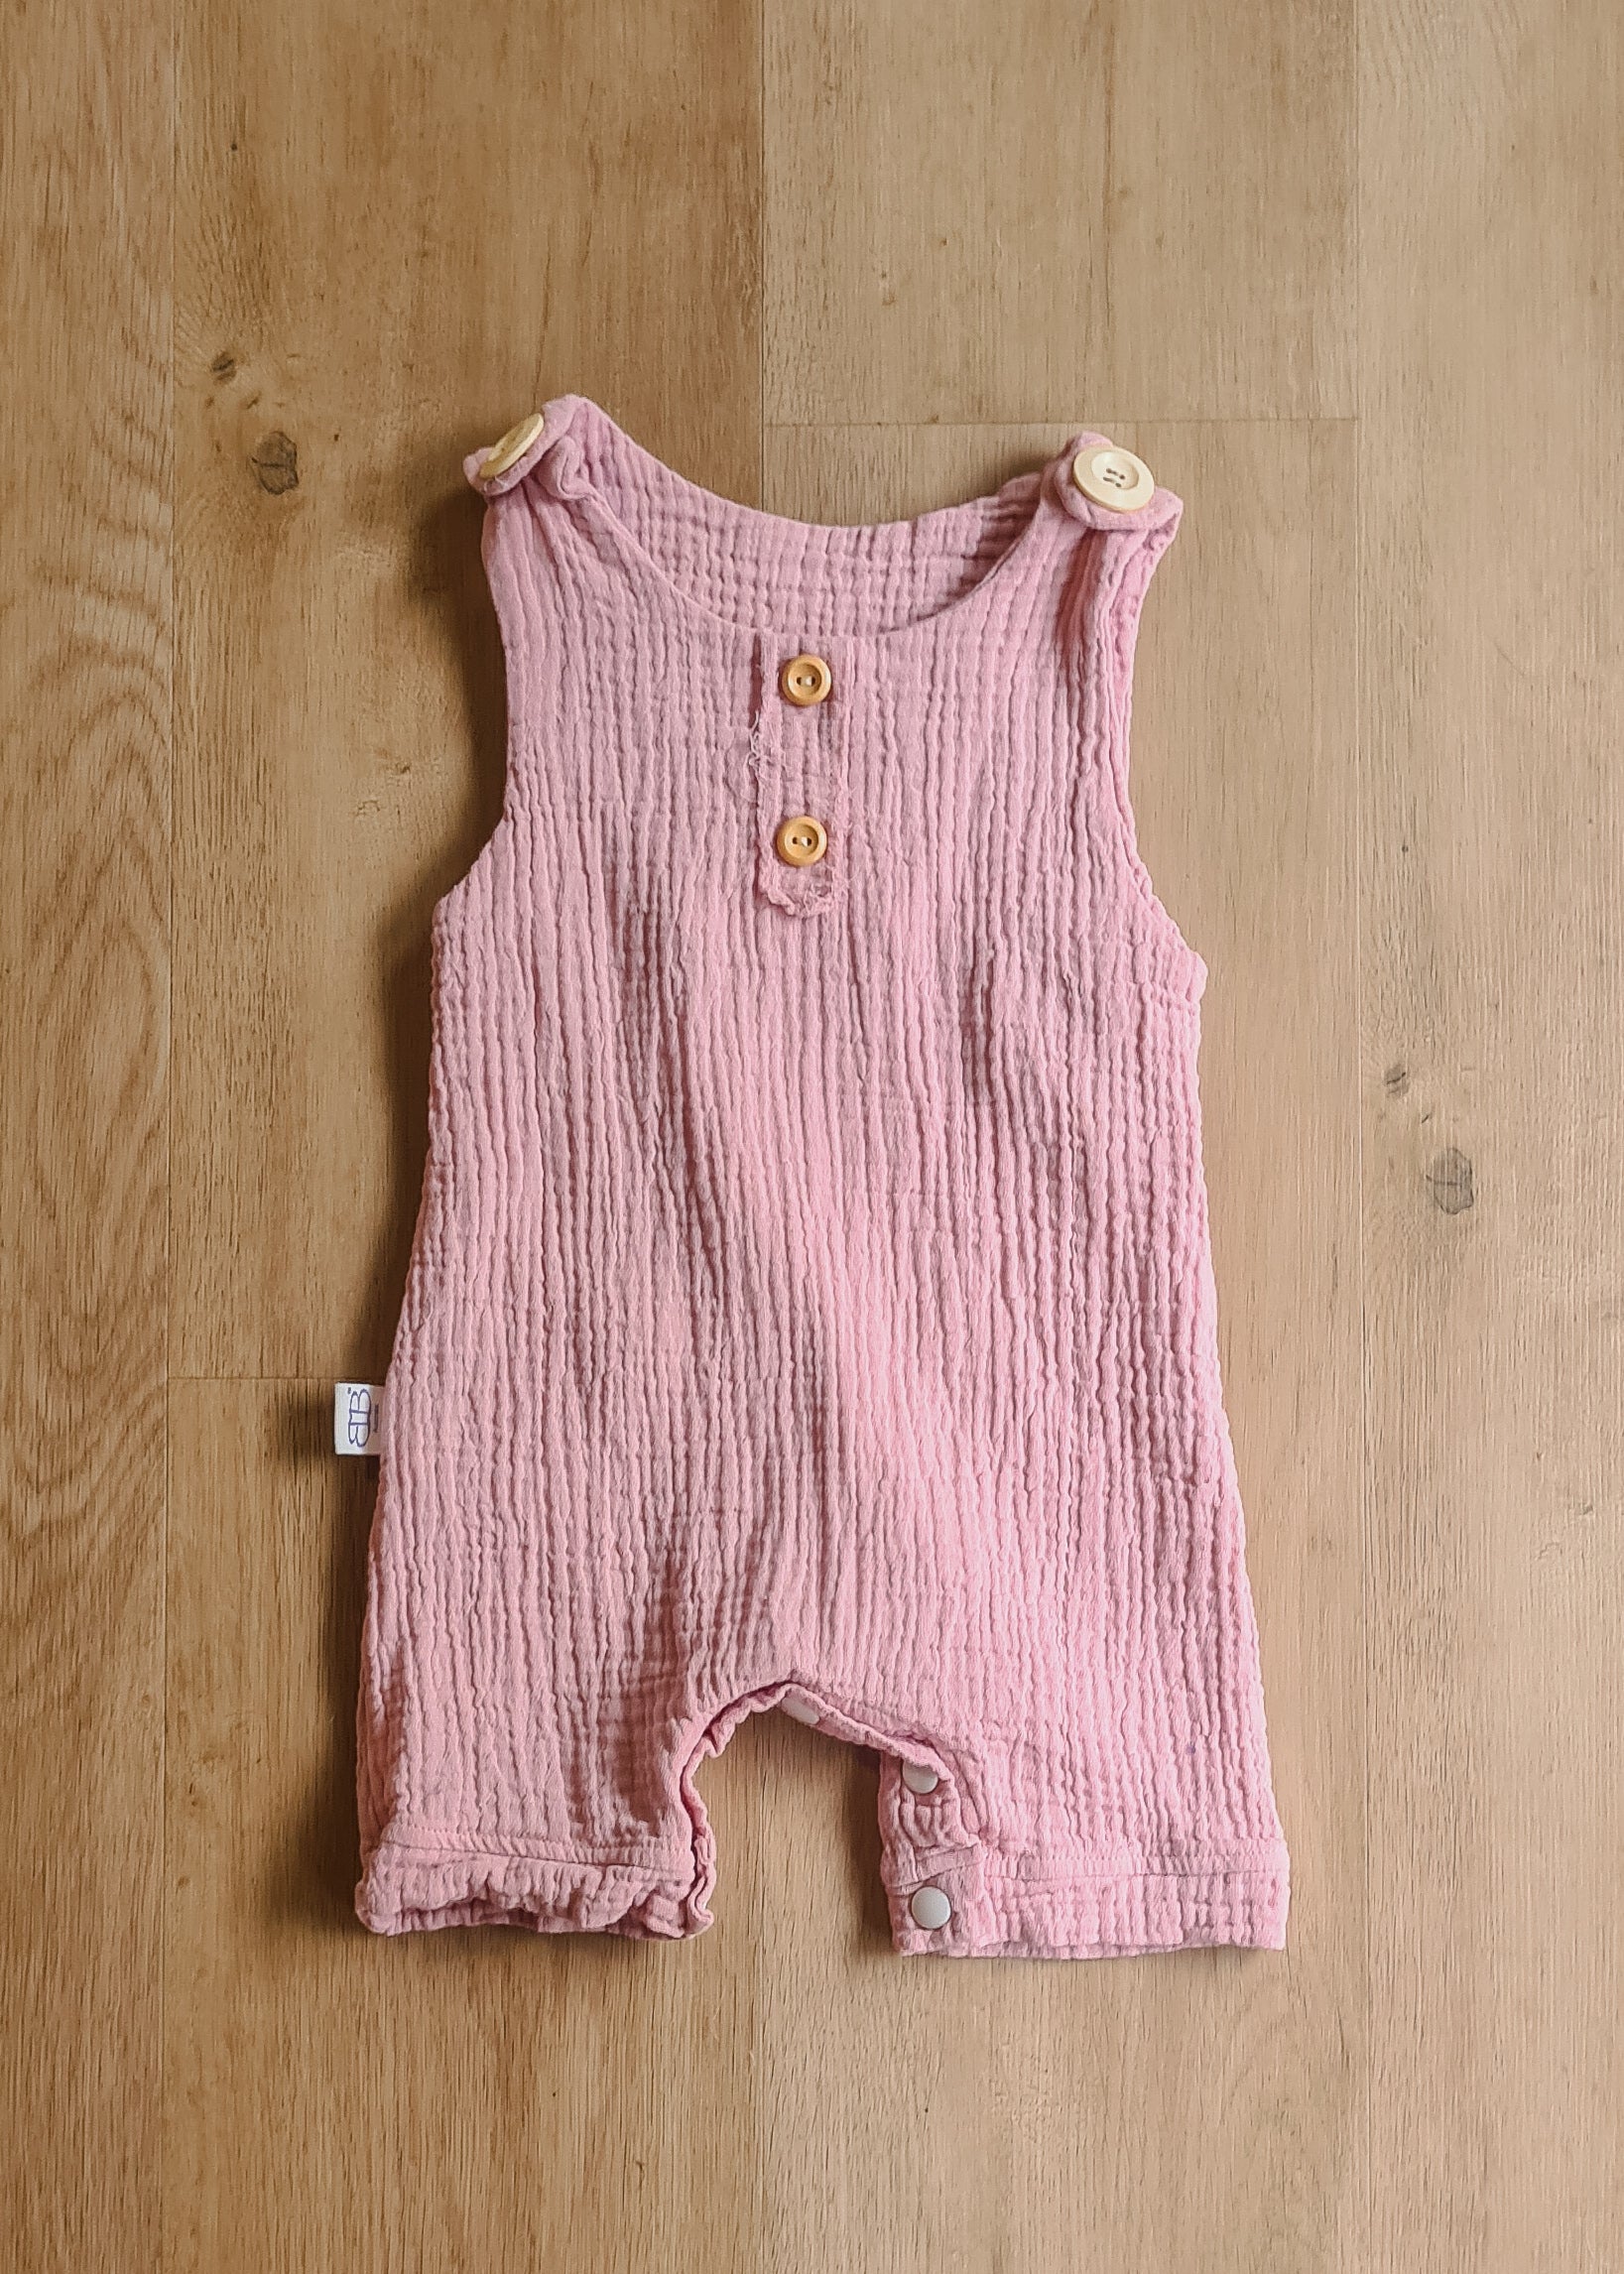 Organic cotton baby romper pink overalls